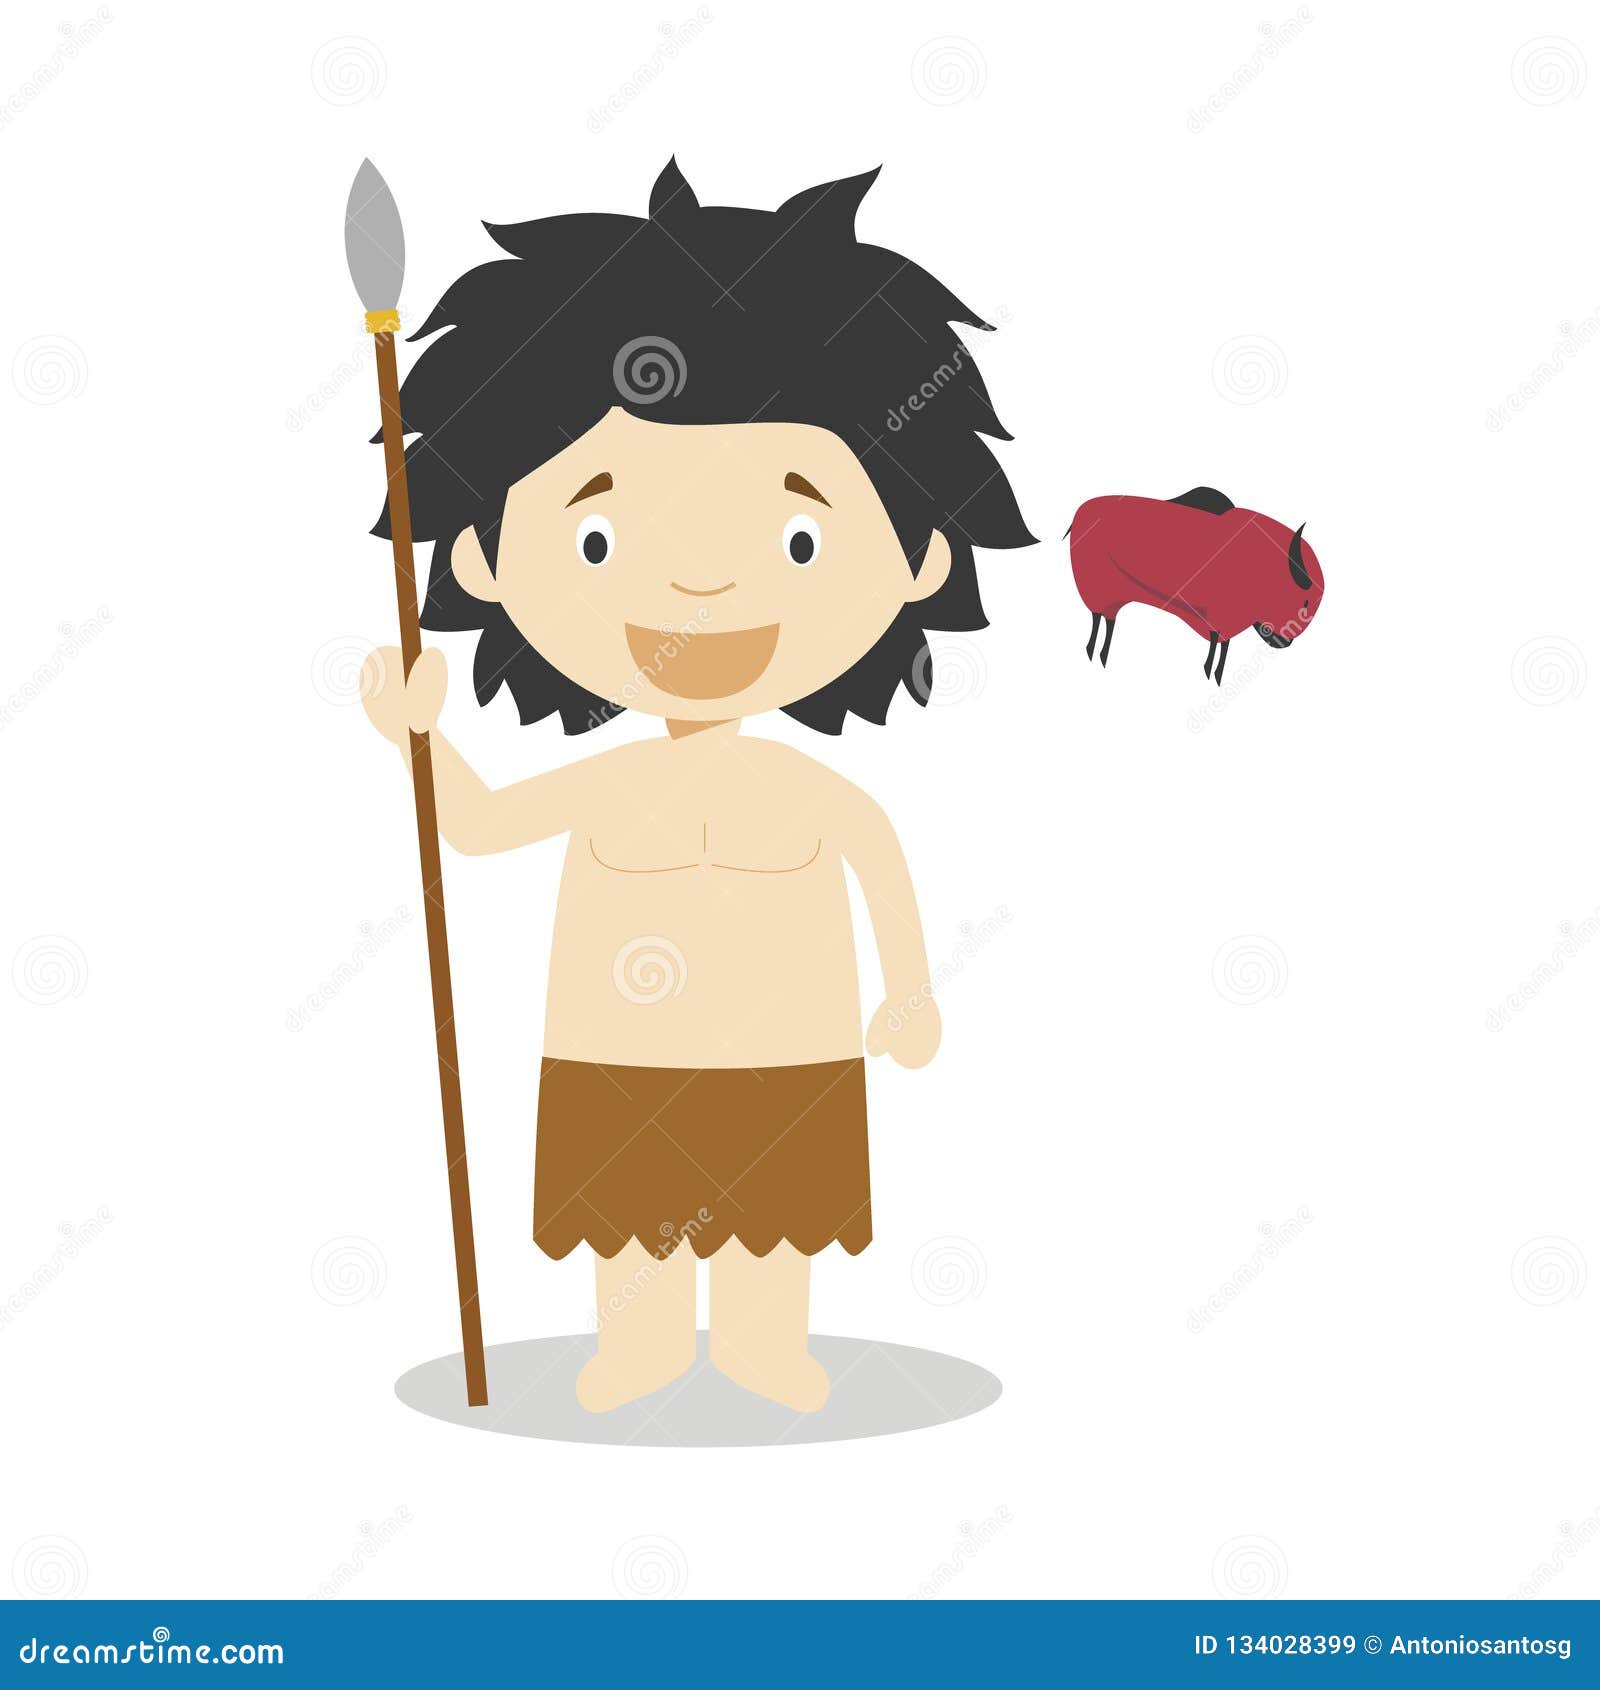 Stone Age Boy Cartoon Character with a Rock Painting. Vector Illustration  Stock Vector - Illustration of design, rock: 134028399